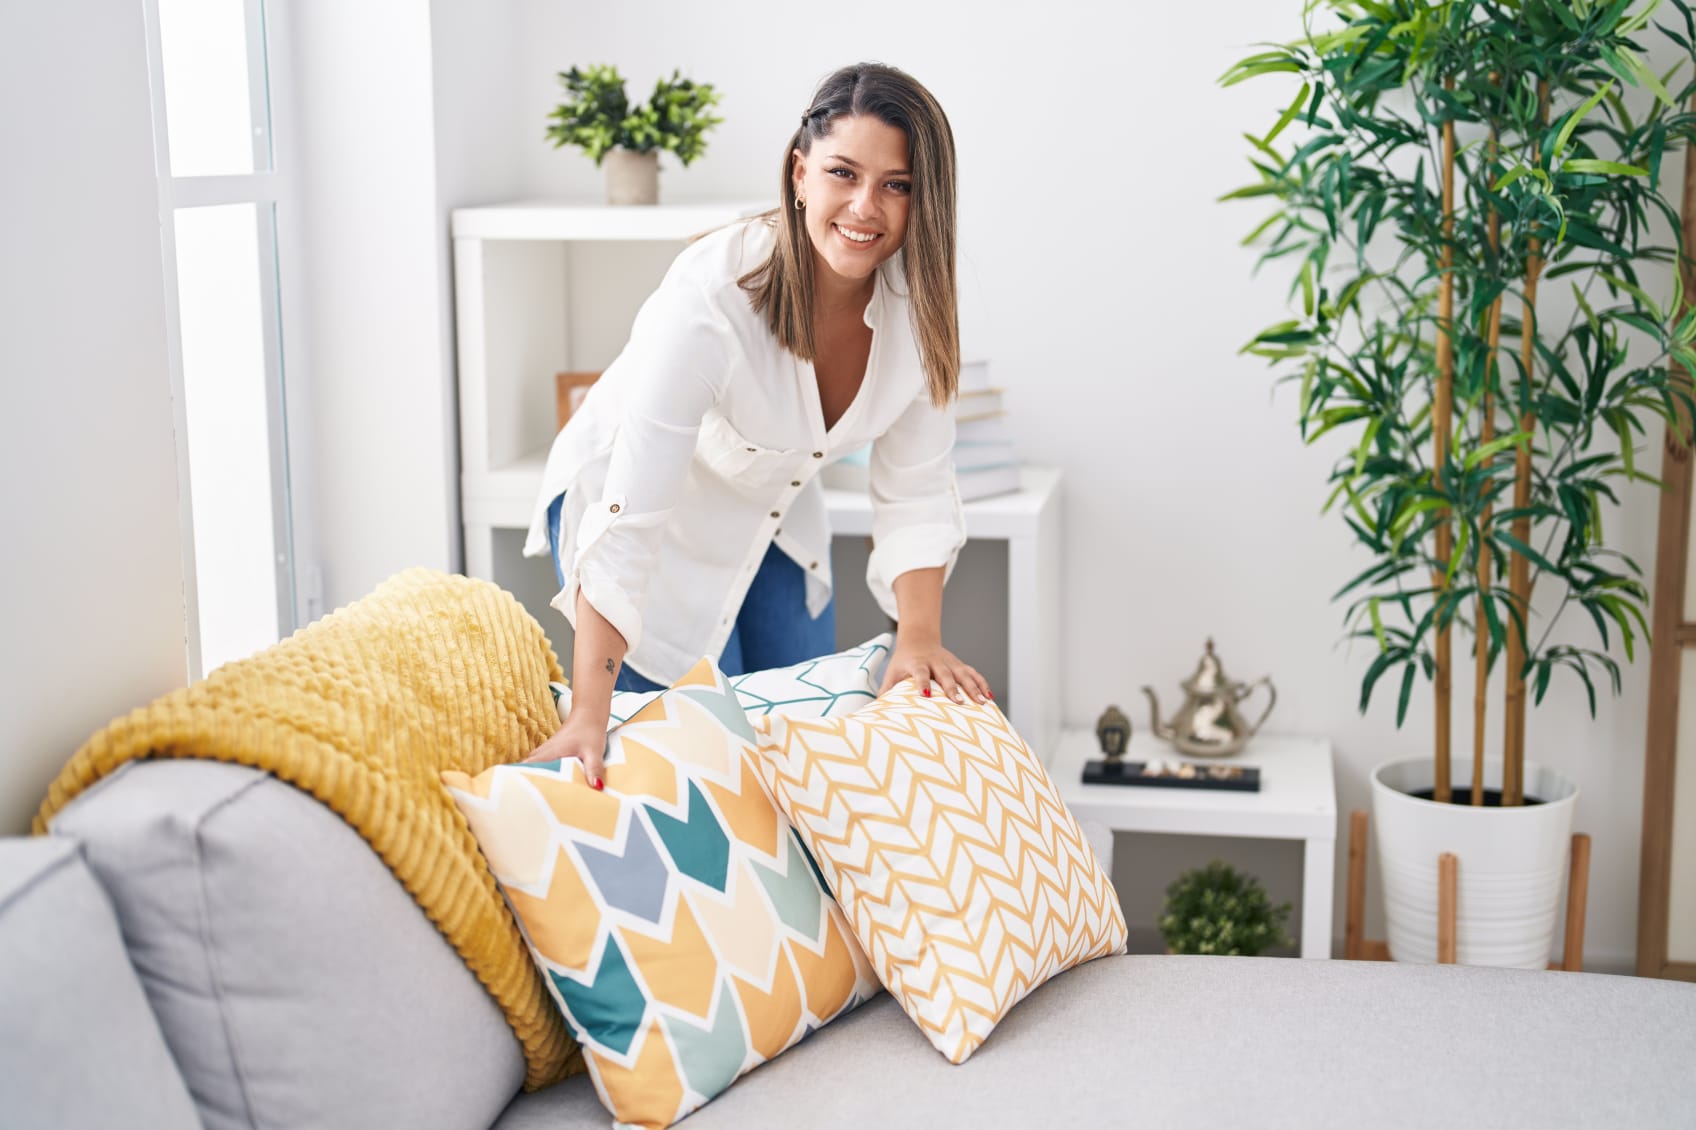 A young hispanic woman is arranging throw pillows and blankets on a couch while smiling